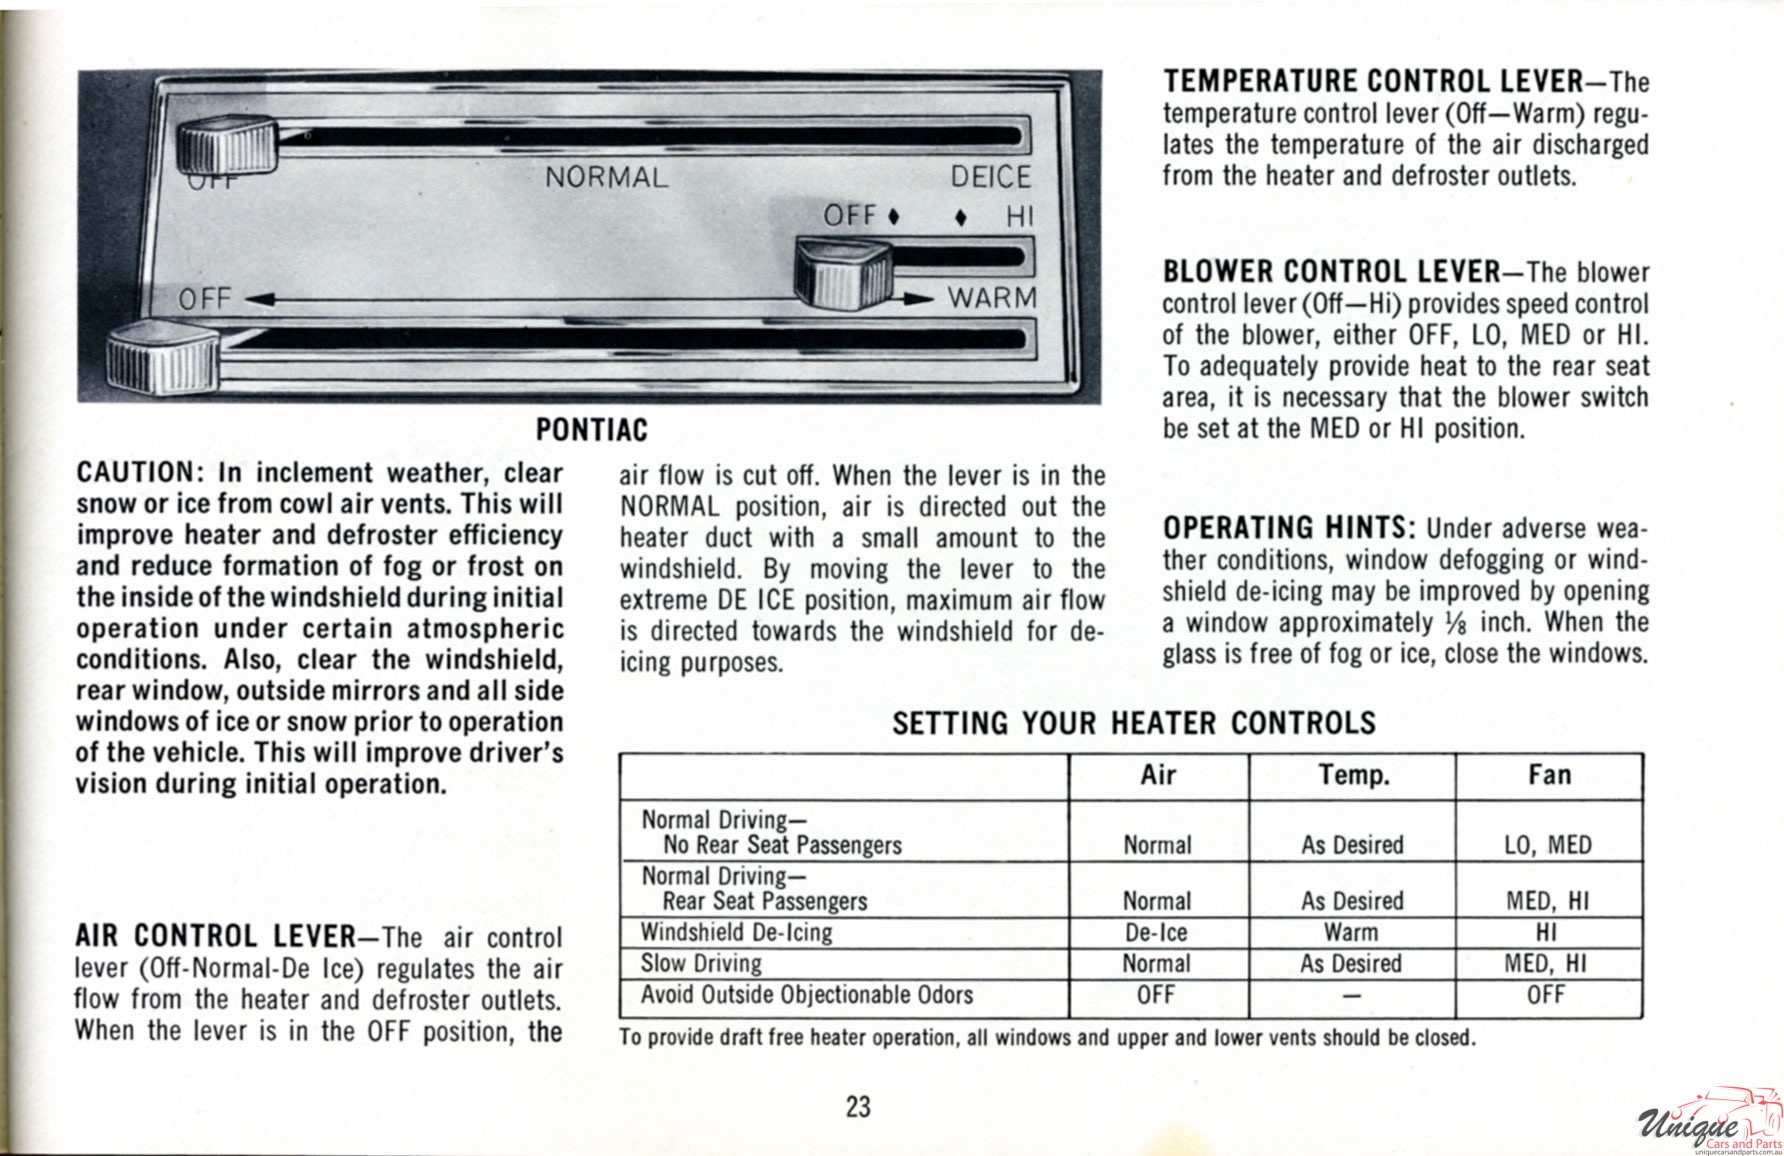 1969 Pontiac Owners Manual Page 26